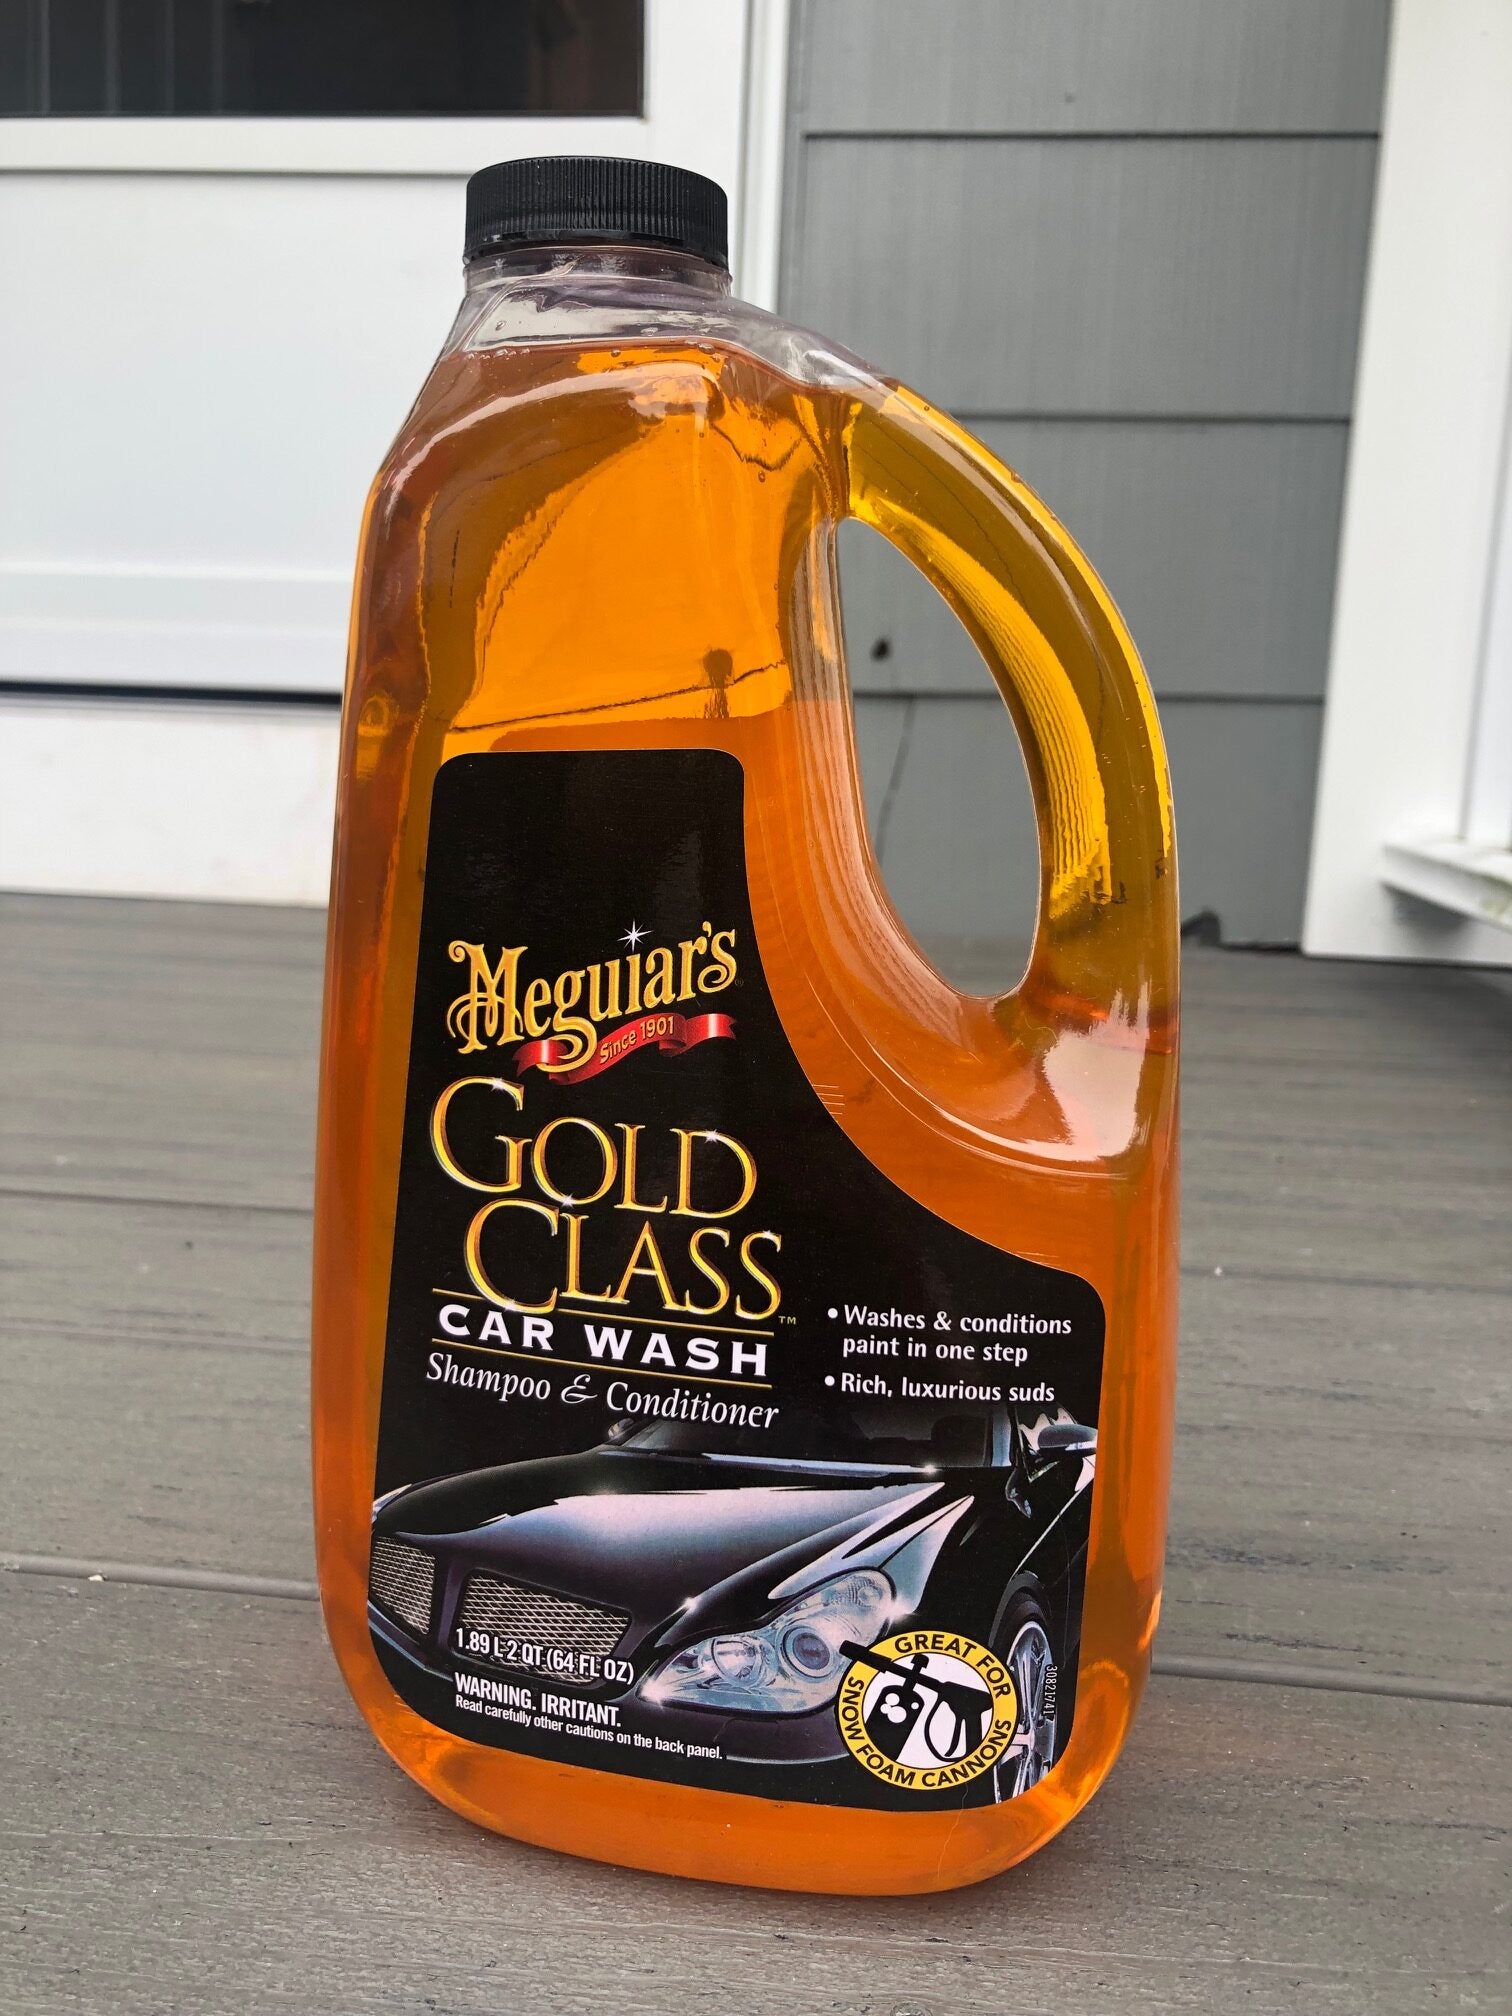 Meguiars Gold Class vs. Chemical Guys Mr. Pink Review